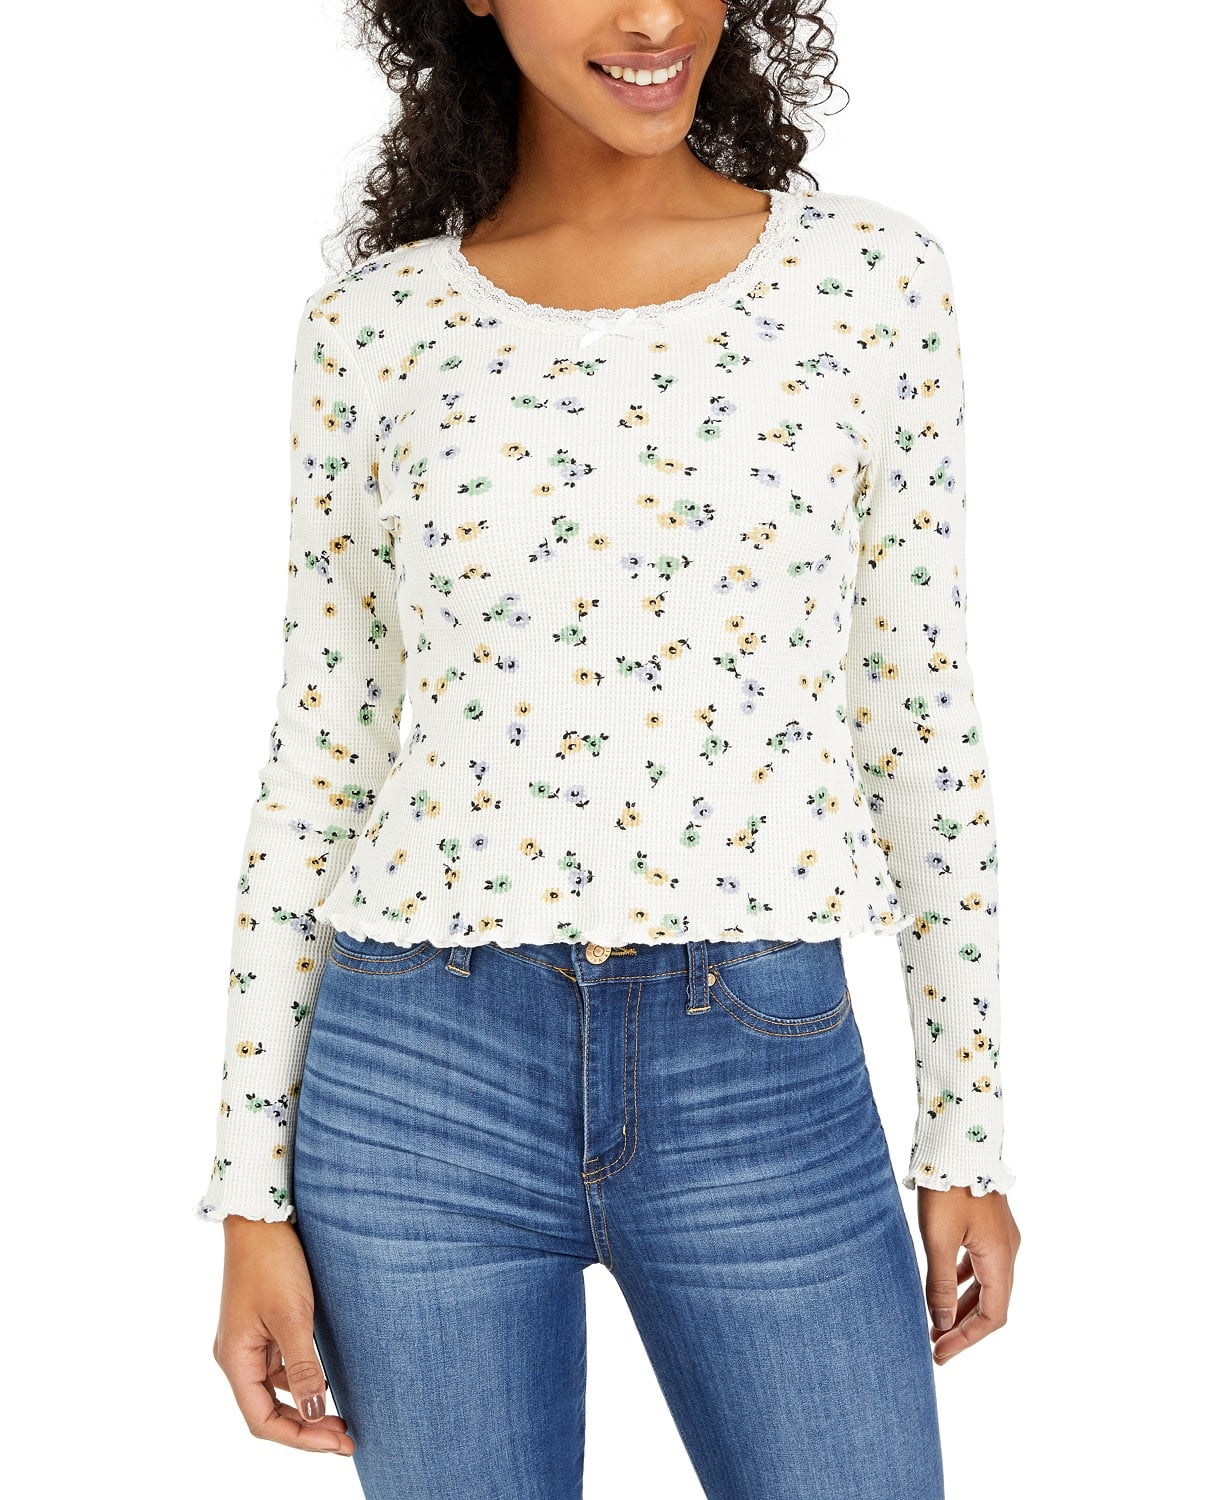 Polly & Esther Juniors' Lace-Trim Floral-Print Thermal Top White